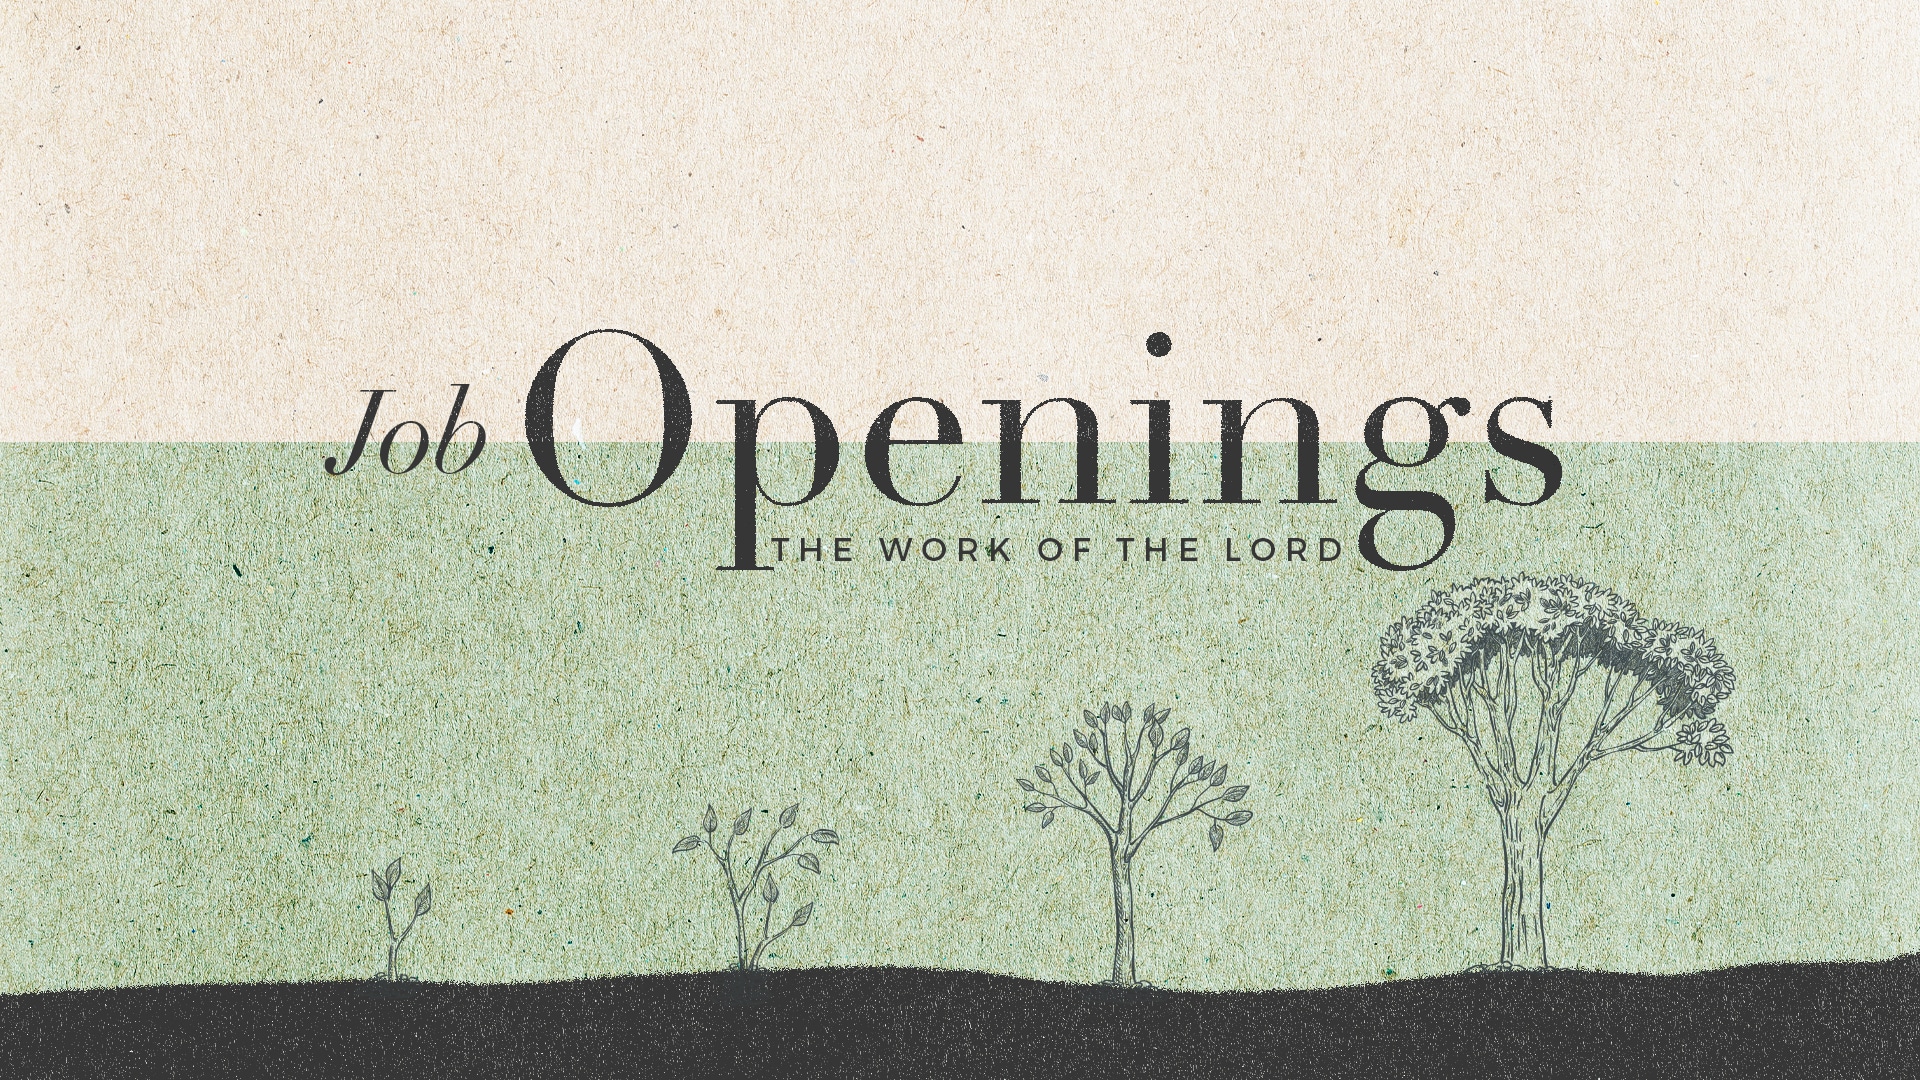 Brooklyn Tabernacle Job Openings (The work of the Lord) thumbnail